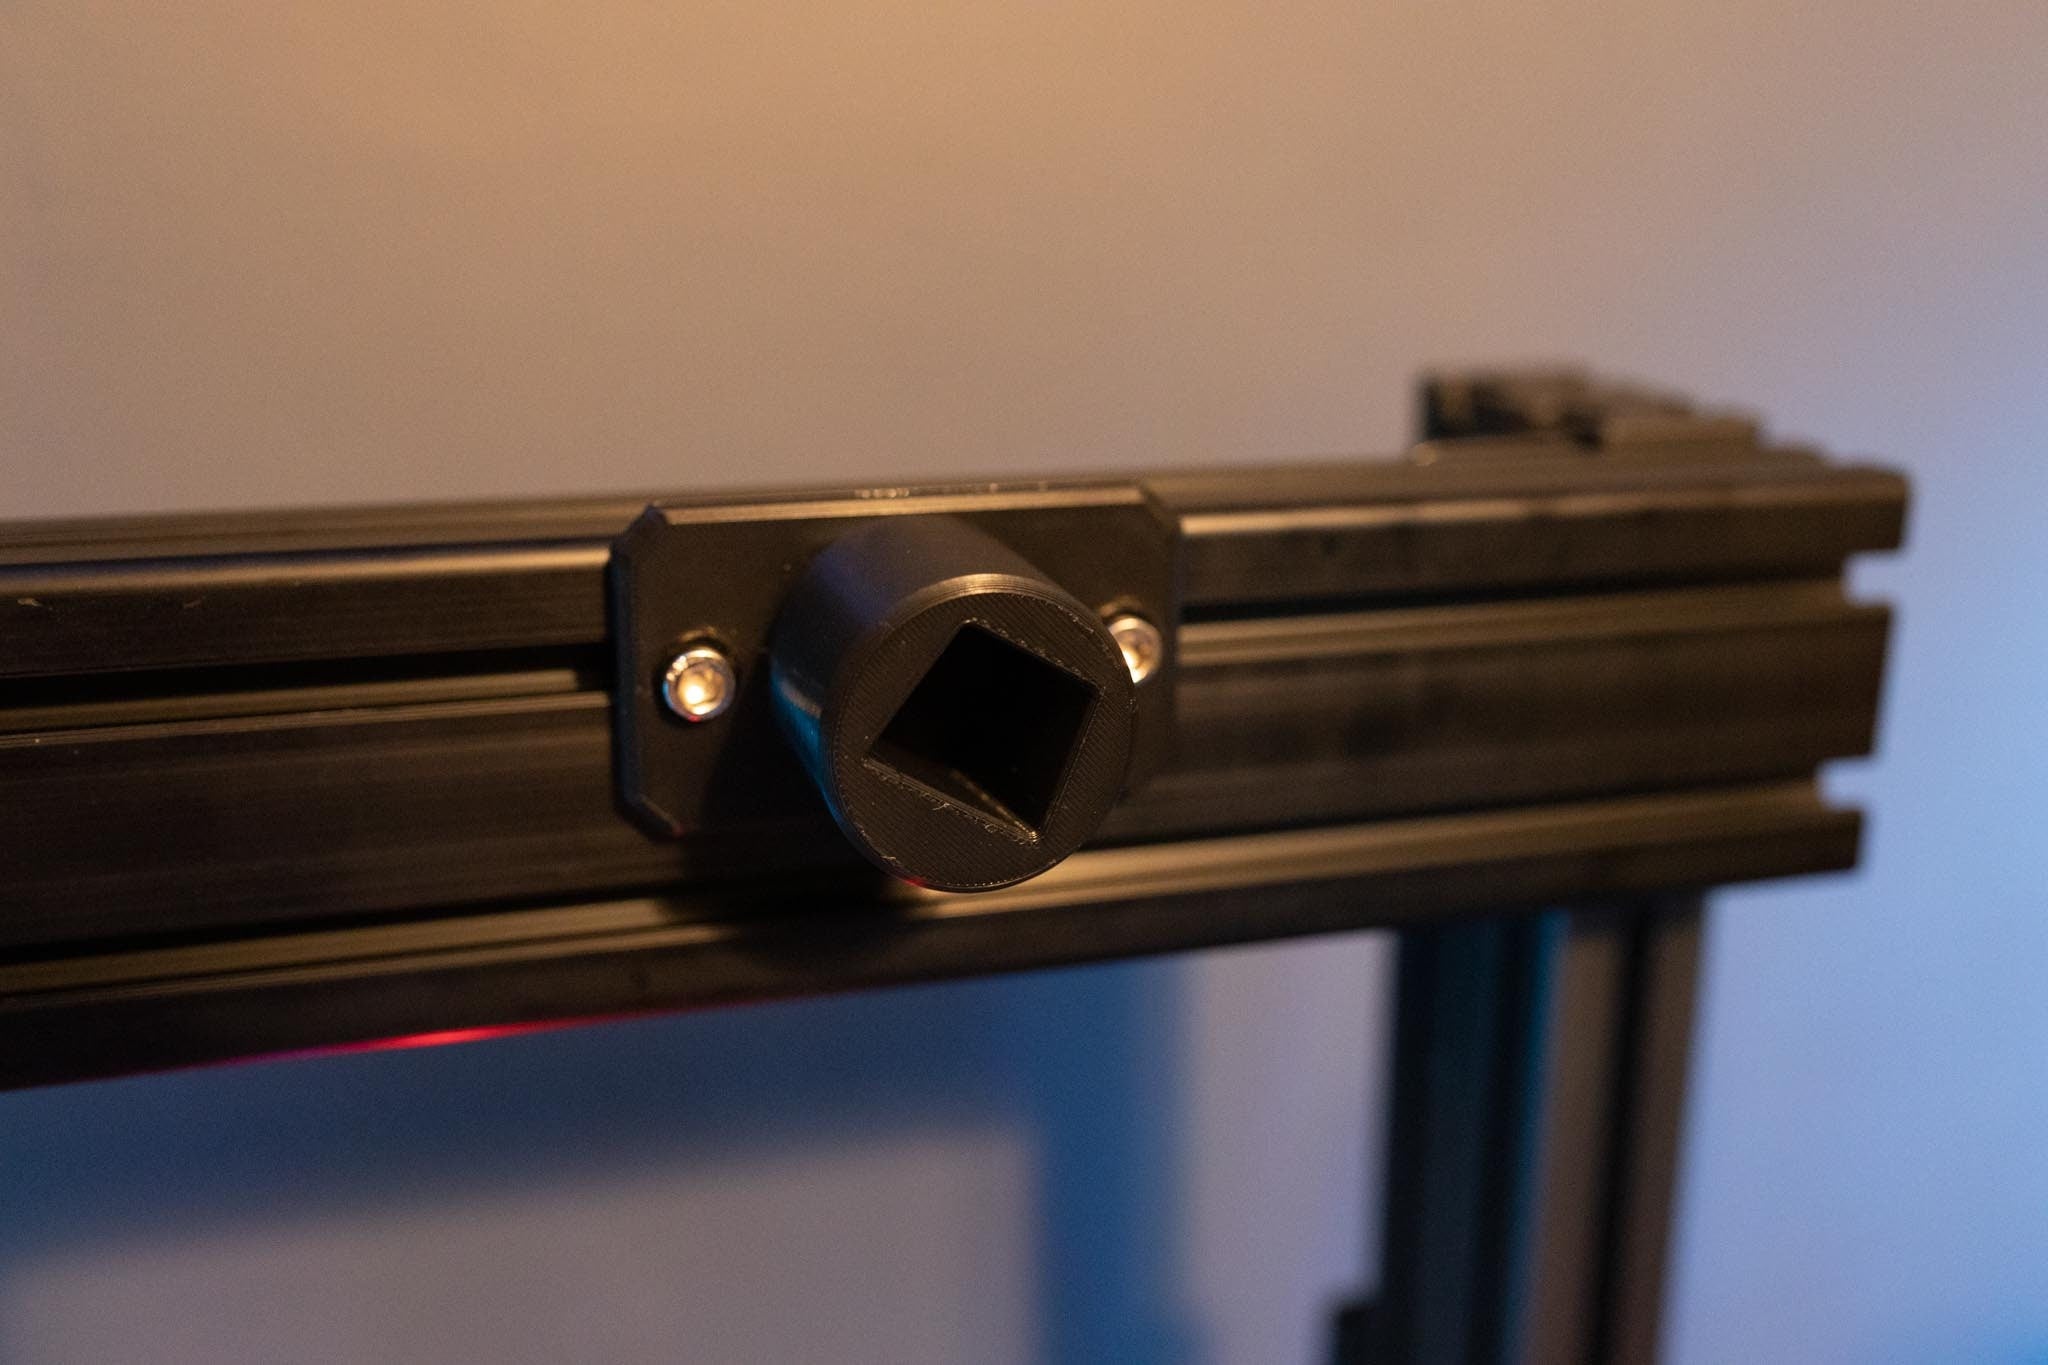 Profile Mount For Xero-play Quick Release